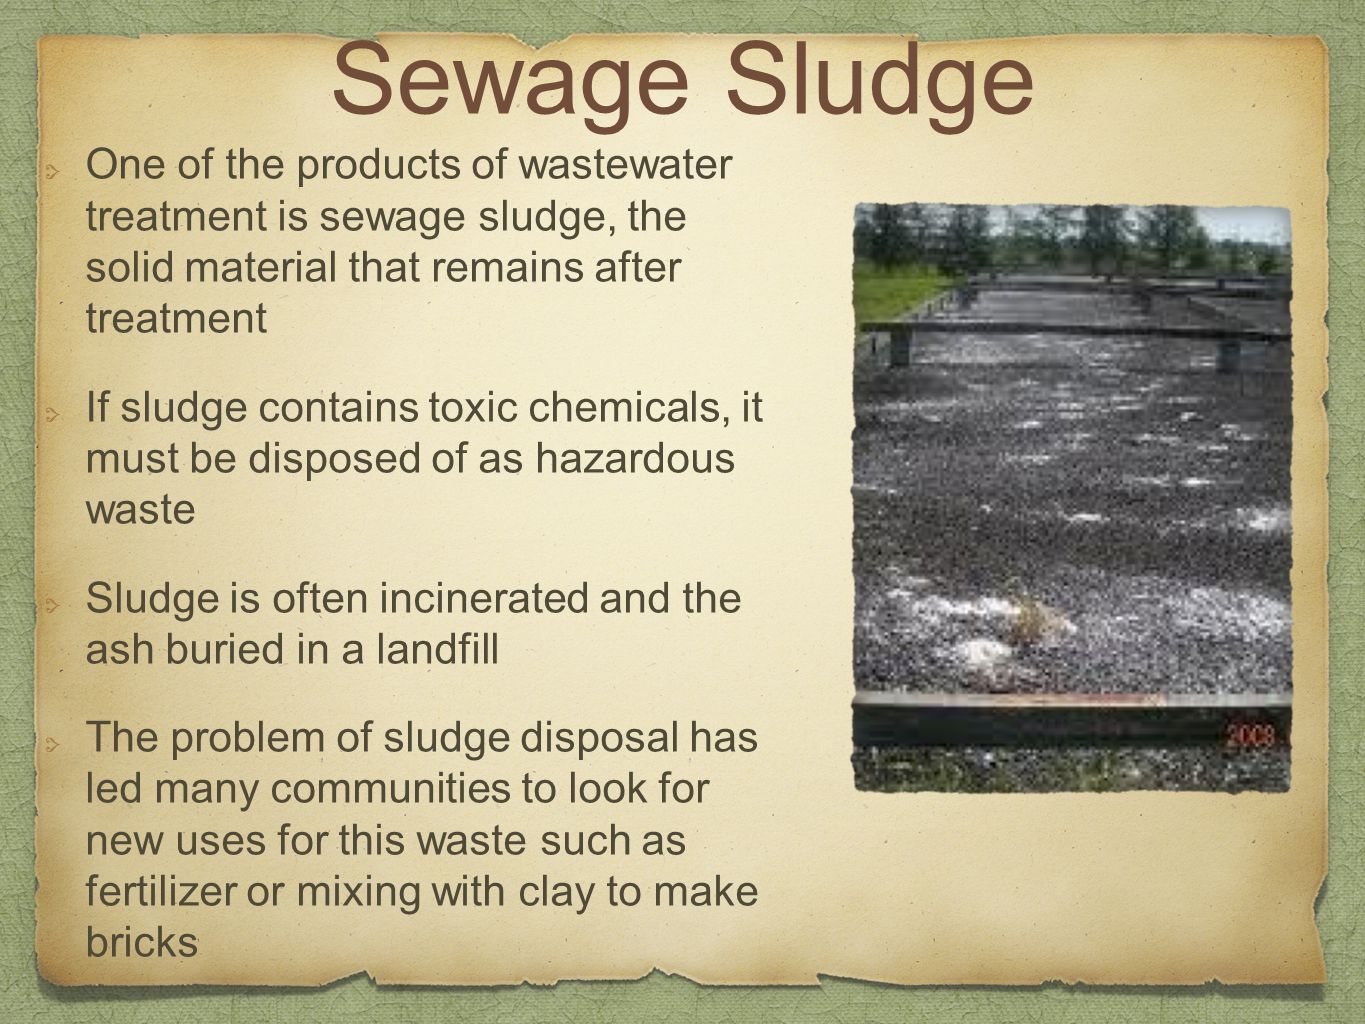 Sewage Sludge One of the products of wastewater treatment is sewage sludge, the solid material that remains after treatment.